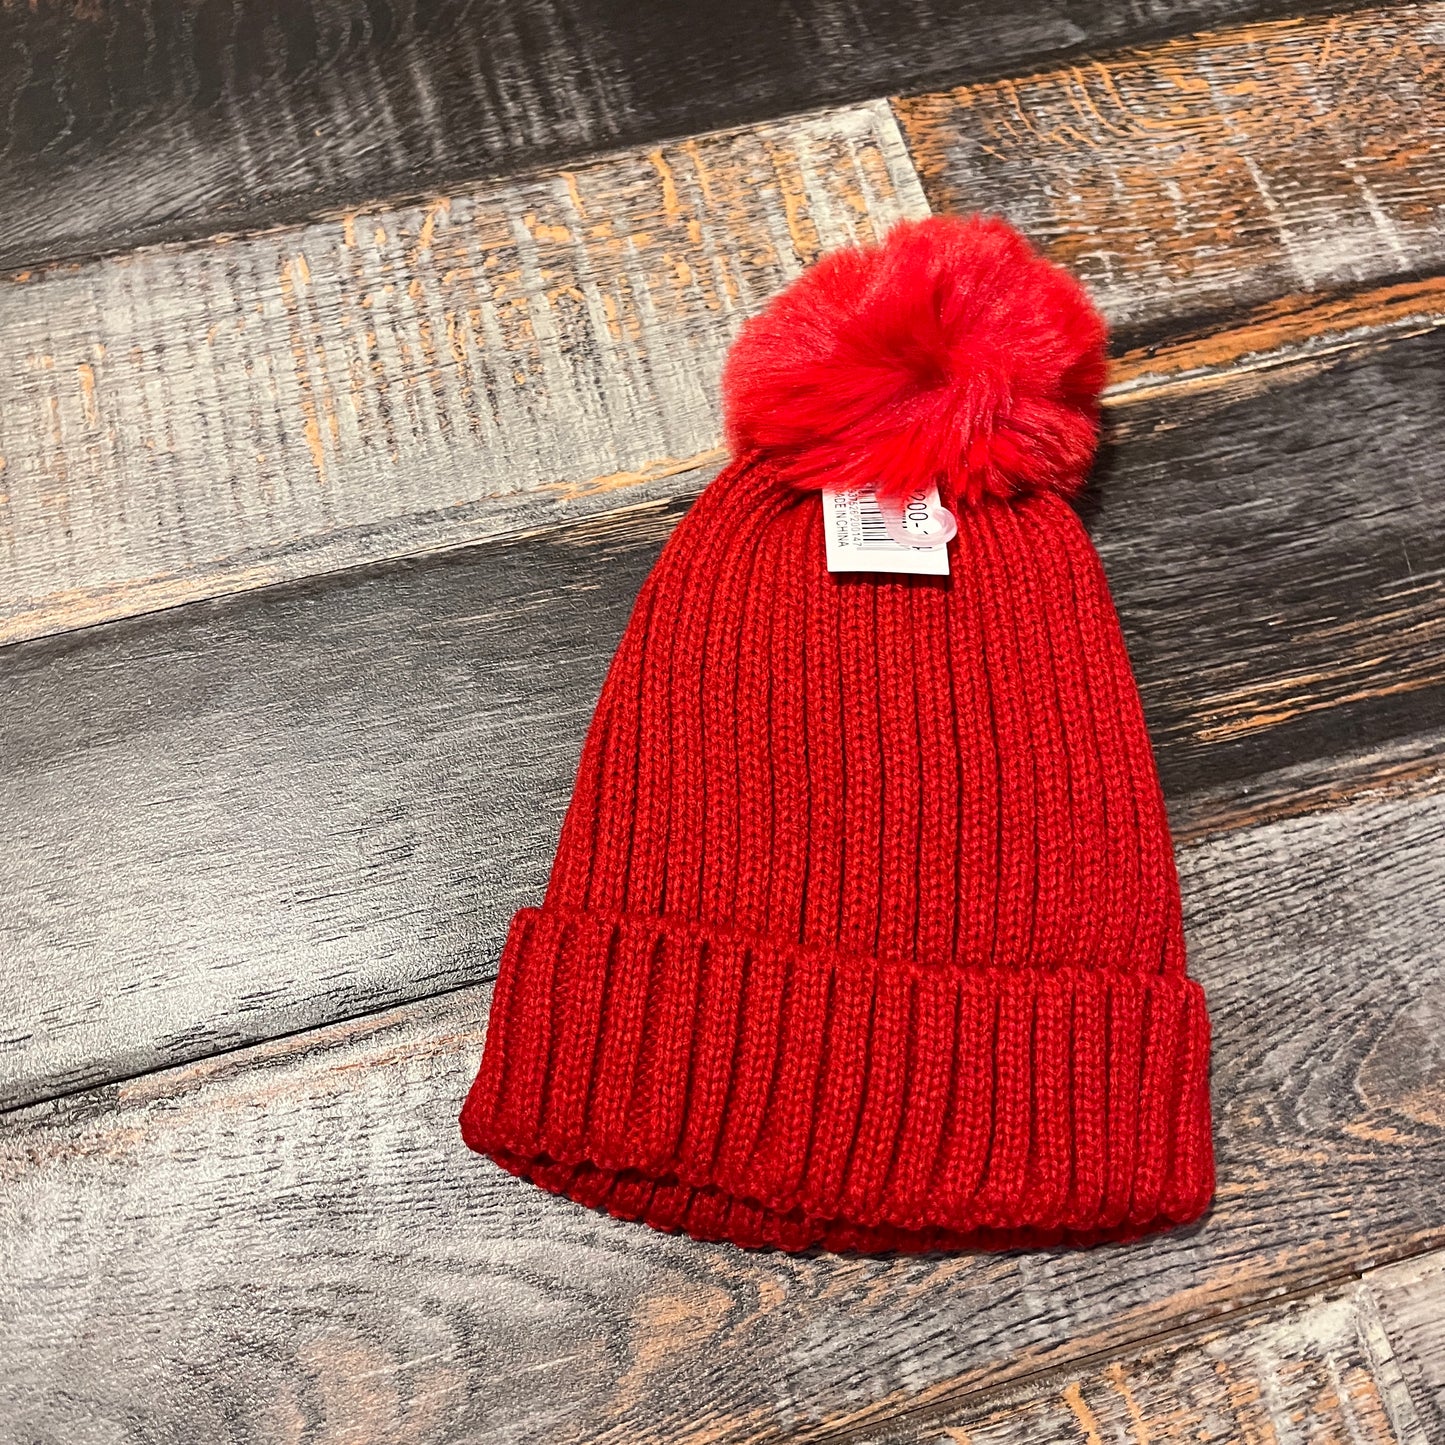 CABLE KNIT FLEECE LINED BEANIE WITH SNAP ON/REMOVABLE POM POM BEANIE